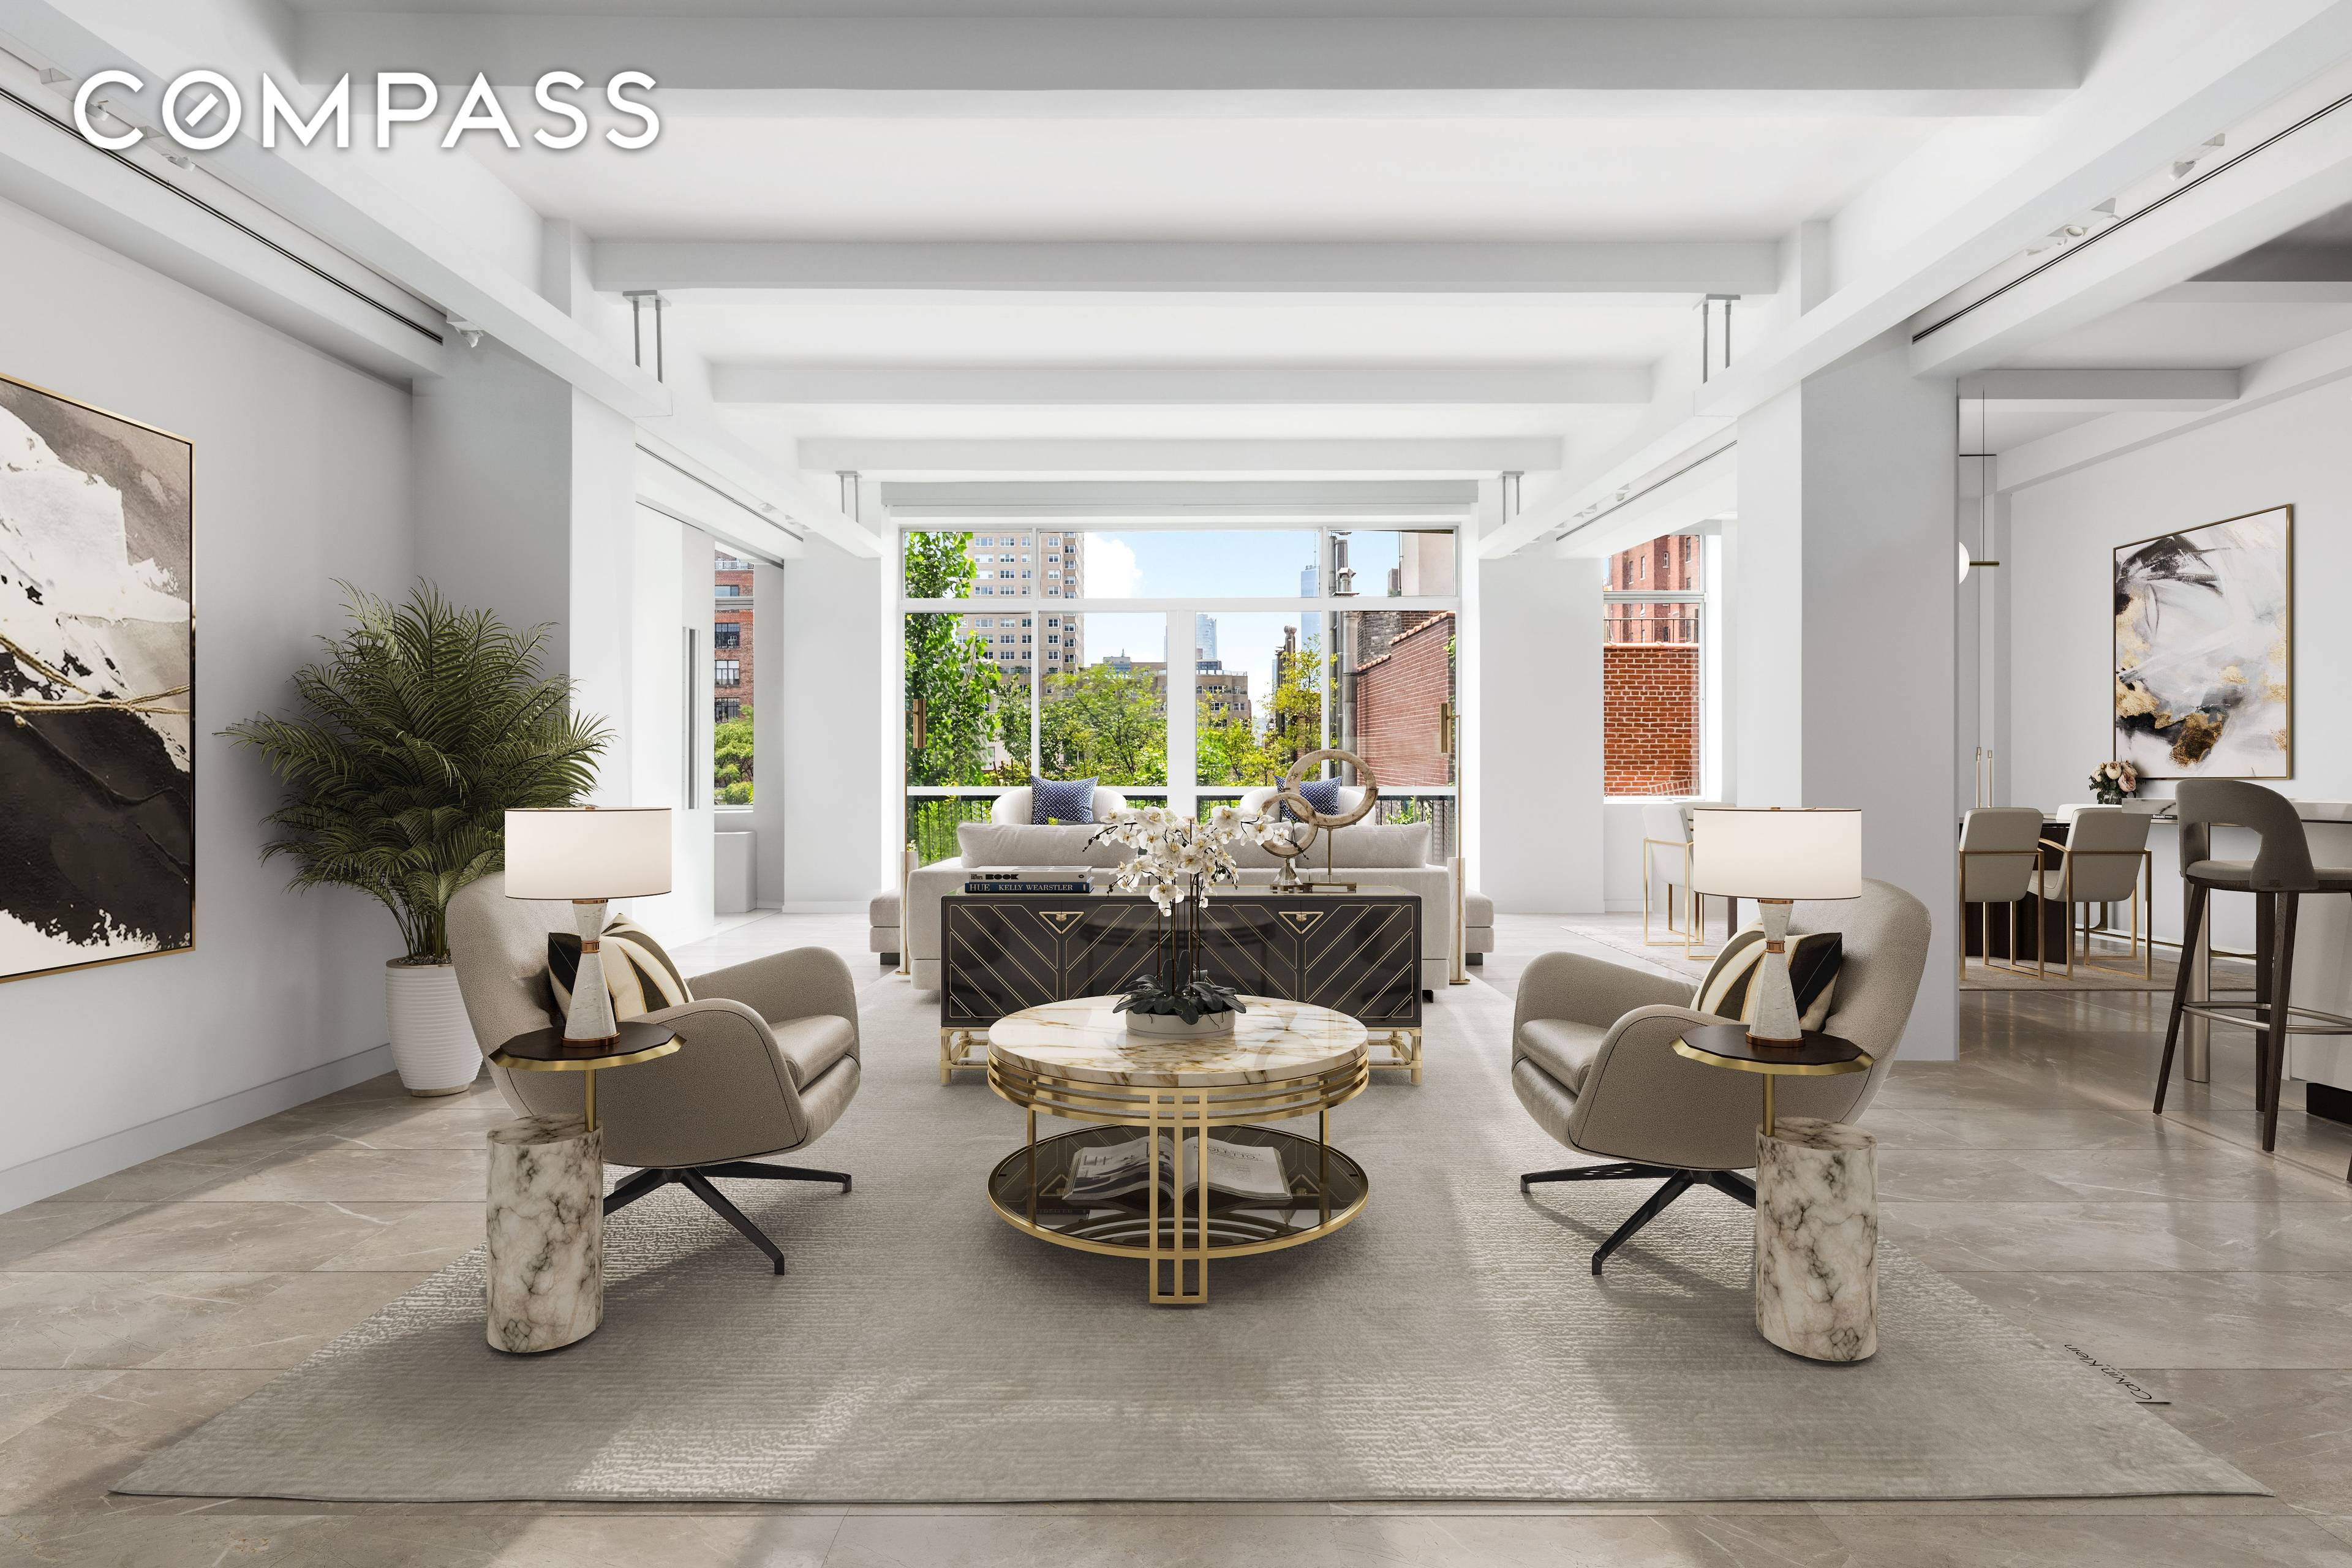 Endless possibilities and extraordinary living await you at this coveted prewar Gold Coast Greenwich Village Condominium, in a premier location between Fifth Avenue and University Place.